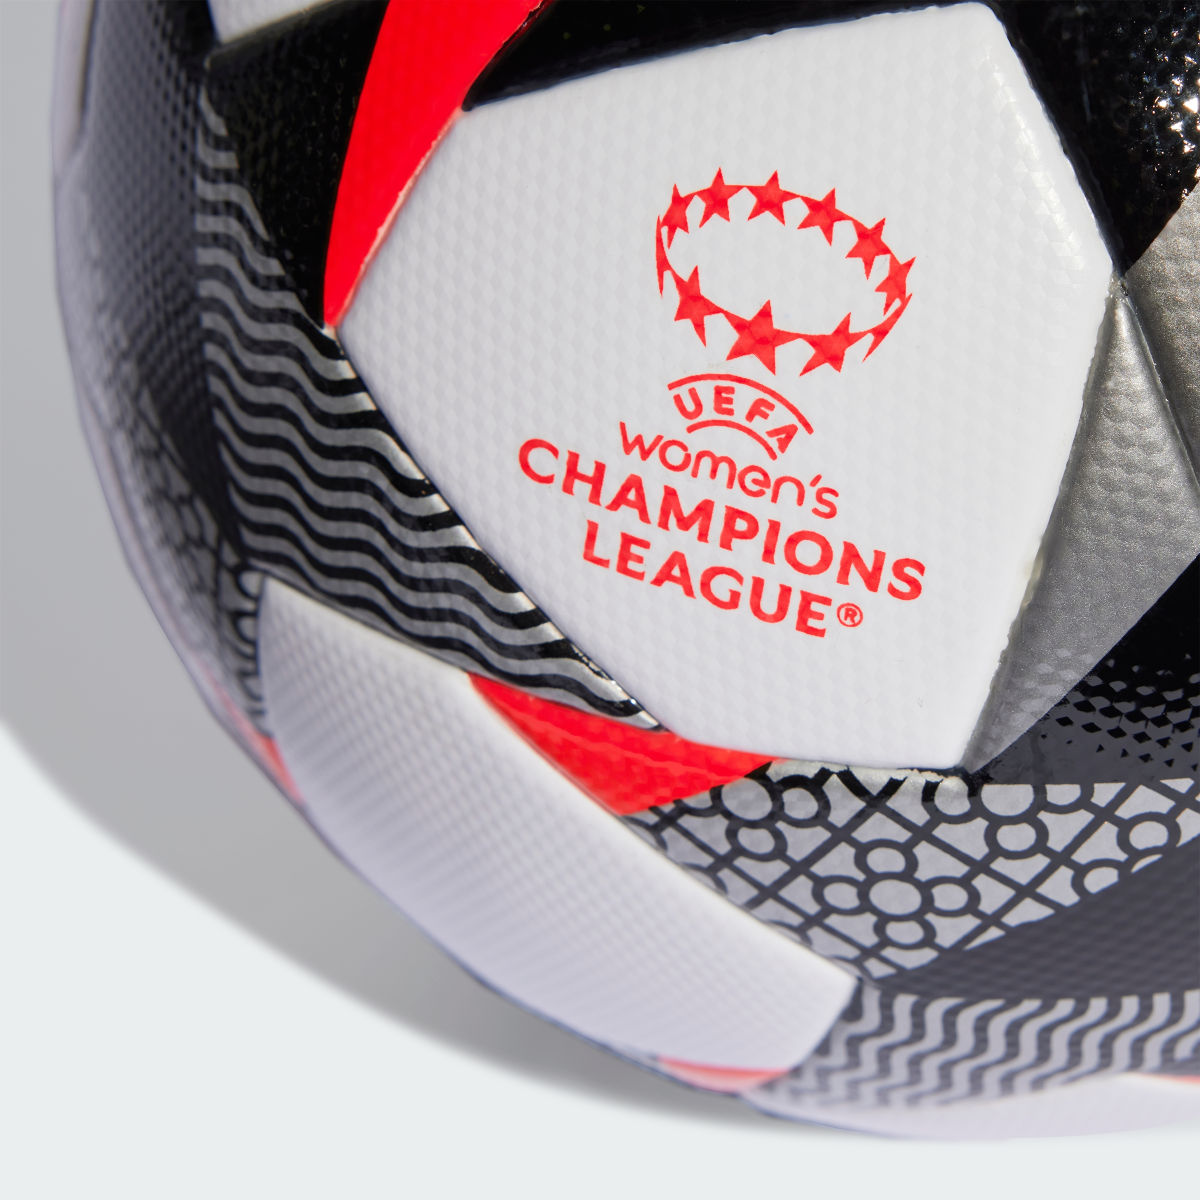 Adidas UWCL League 23/24 Knock-out Ball. 5